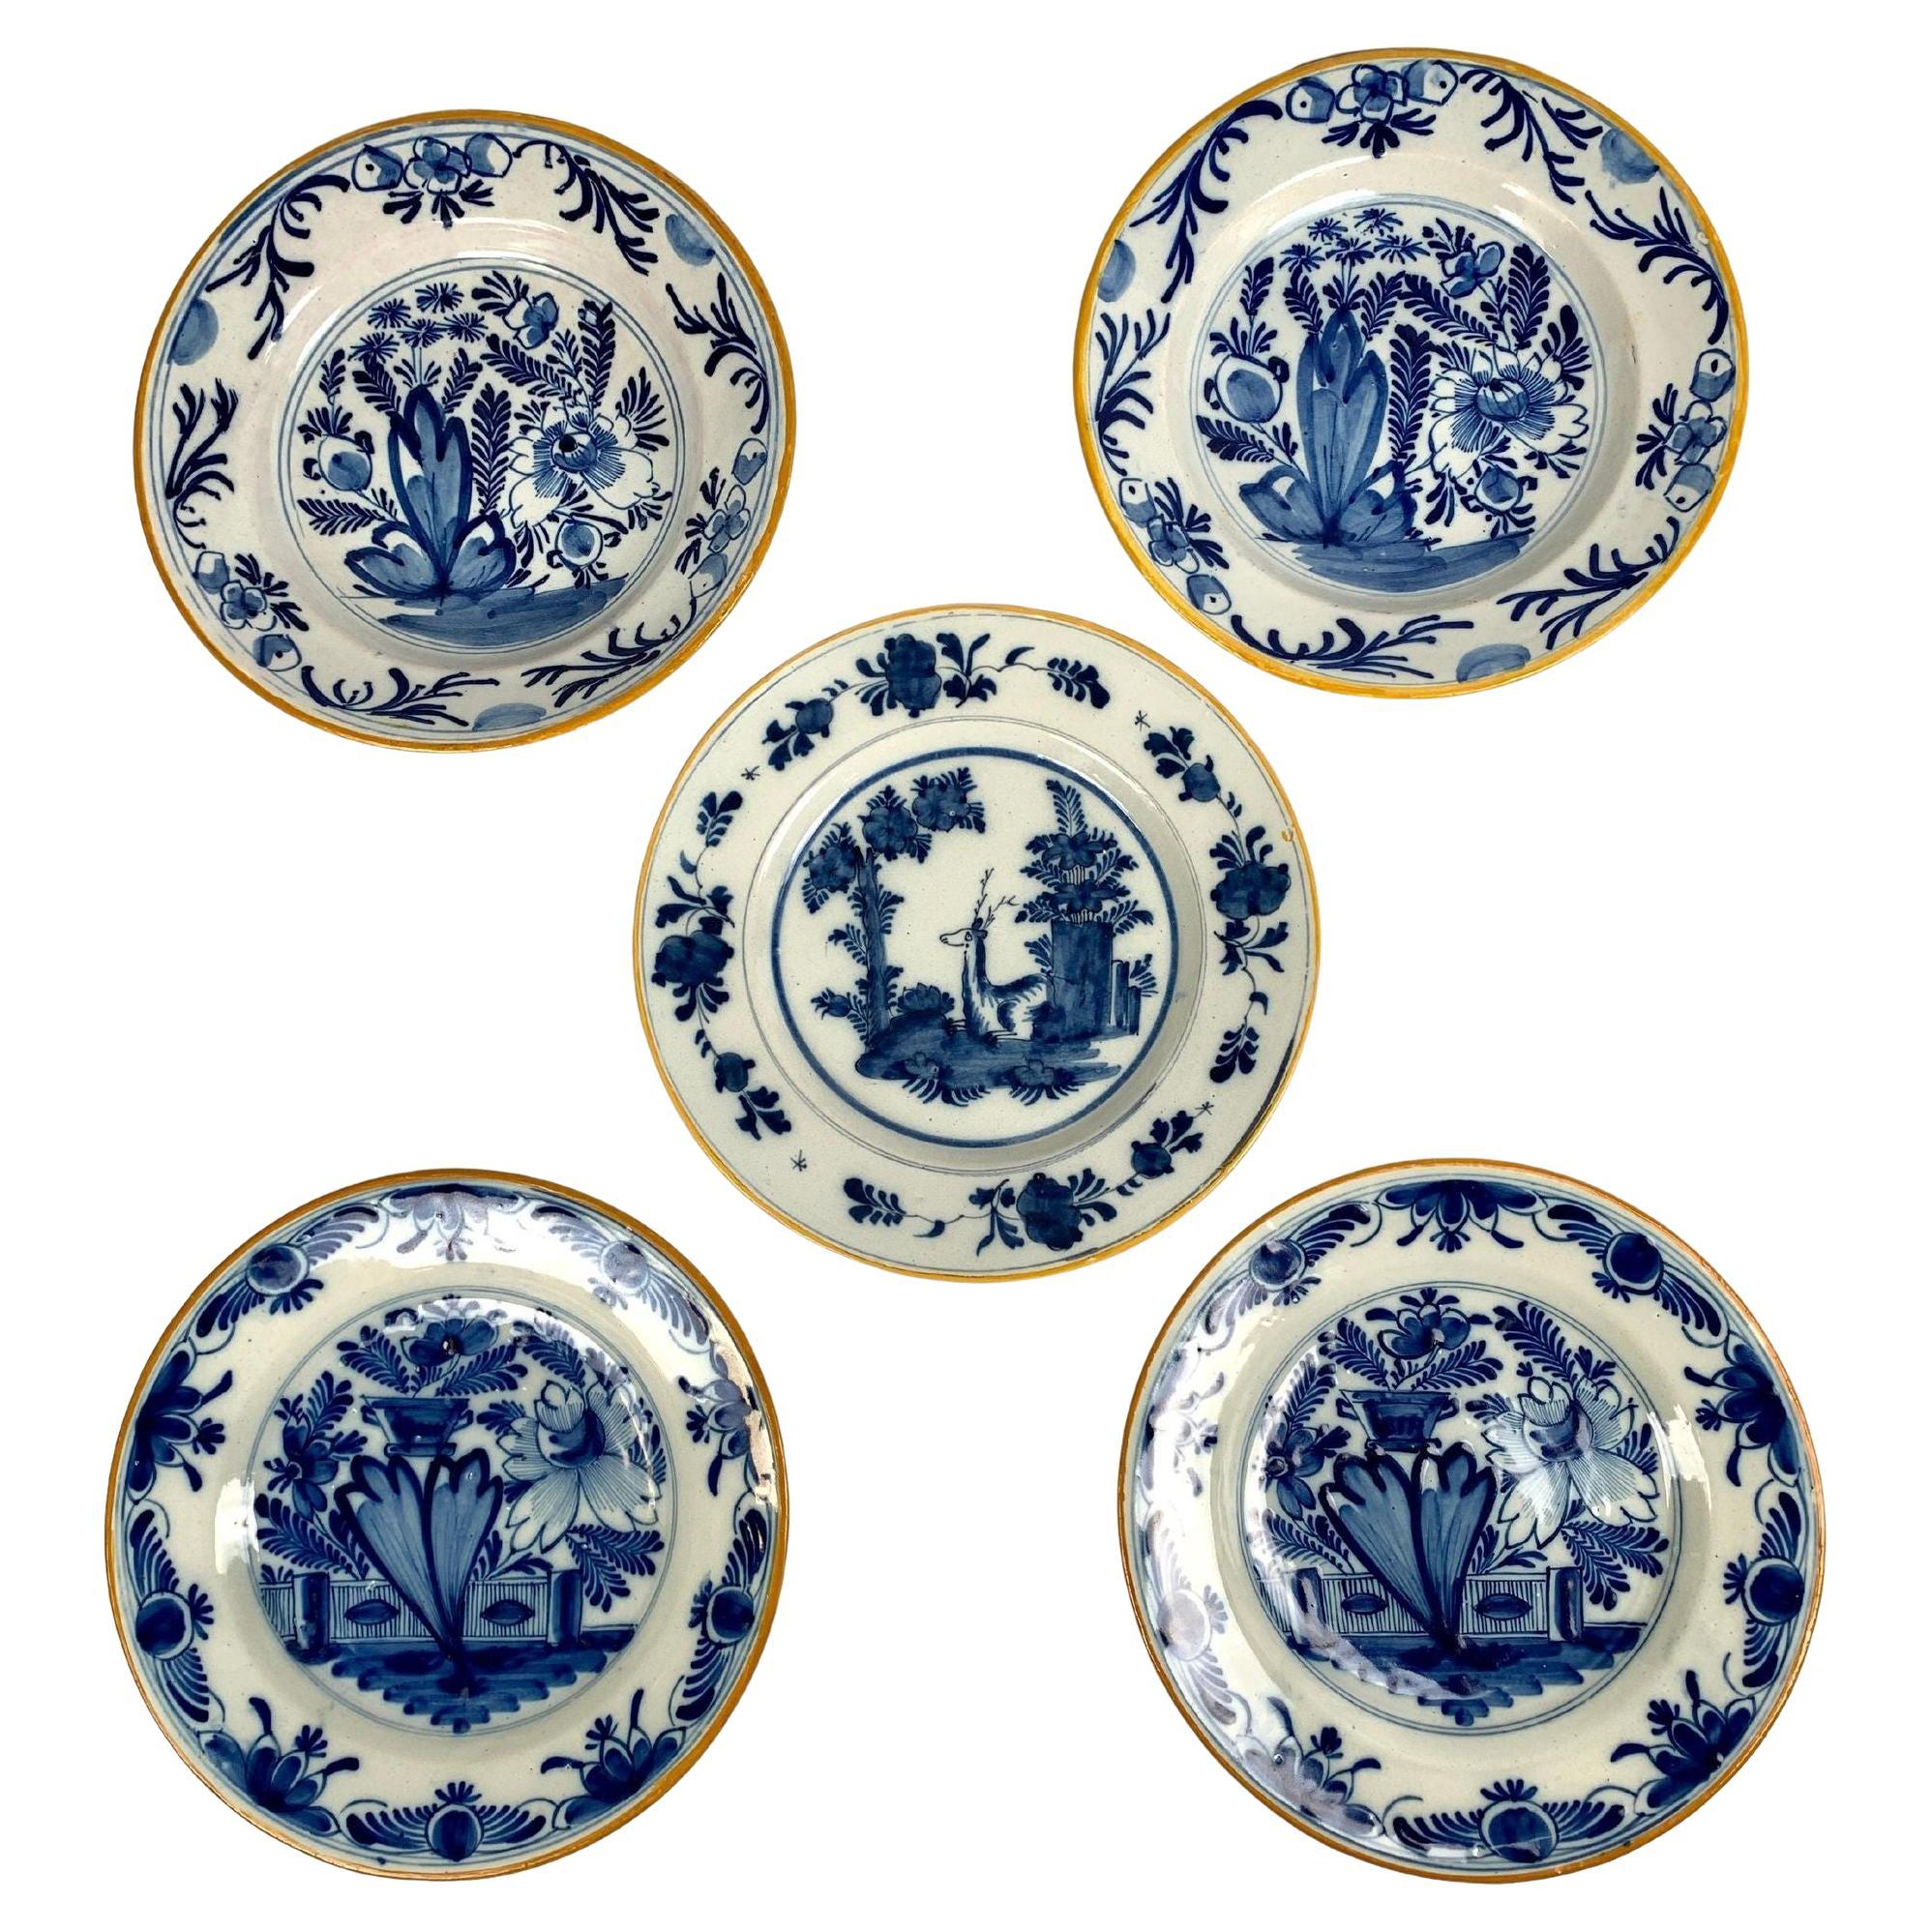 Five Blue and White Delft Plates or Dishes Hand Painted, Netherlands, Circa 1800